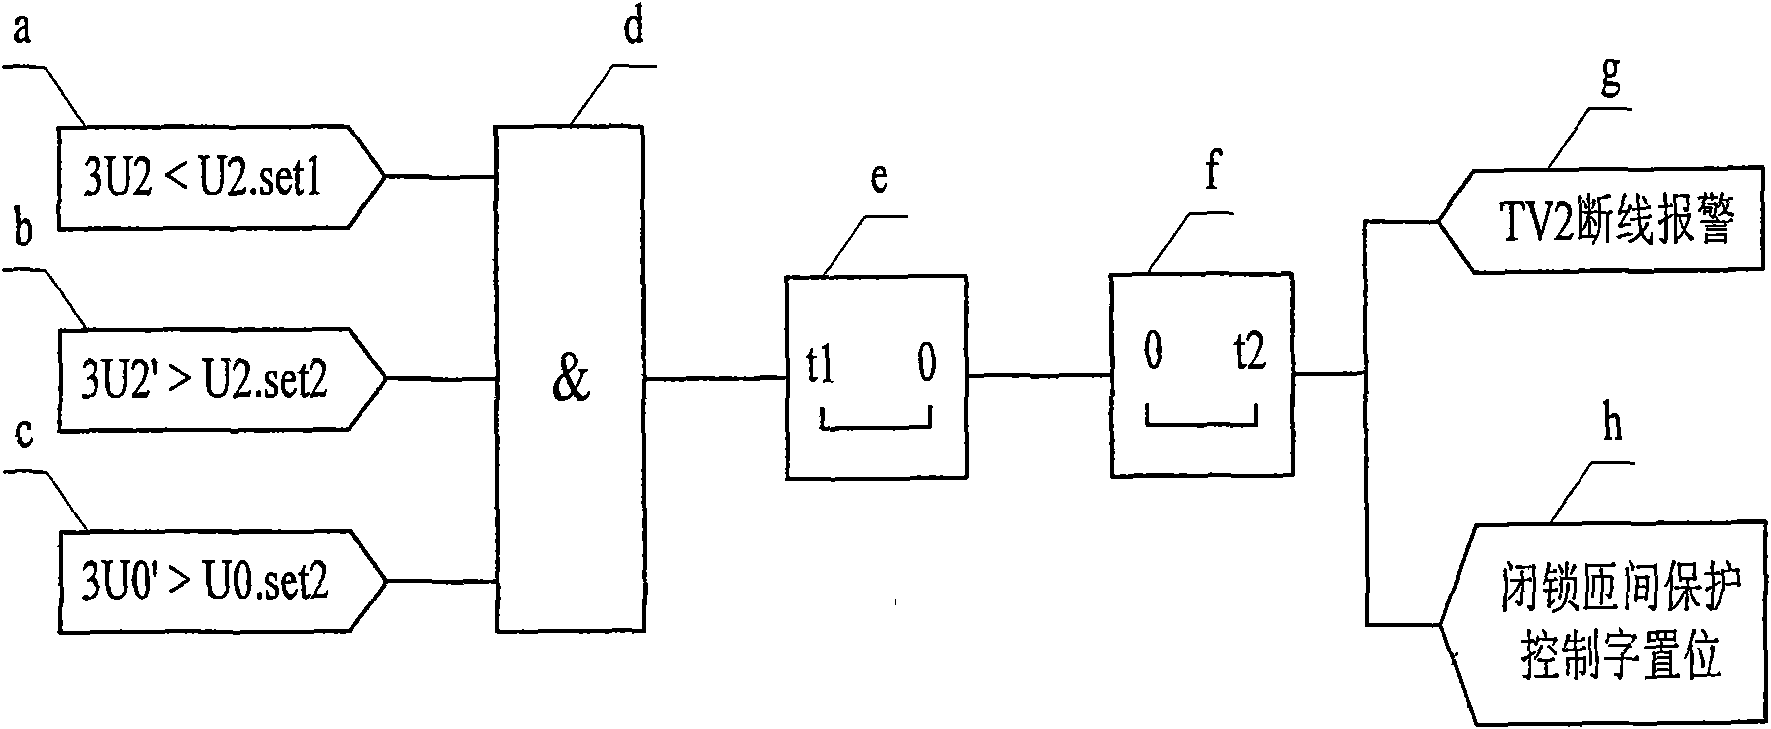 Judgment method of line breakage of special TV for inter-turn protection of generator